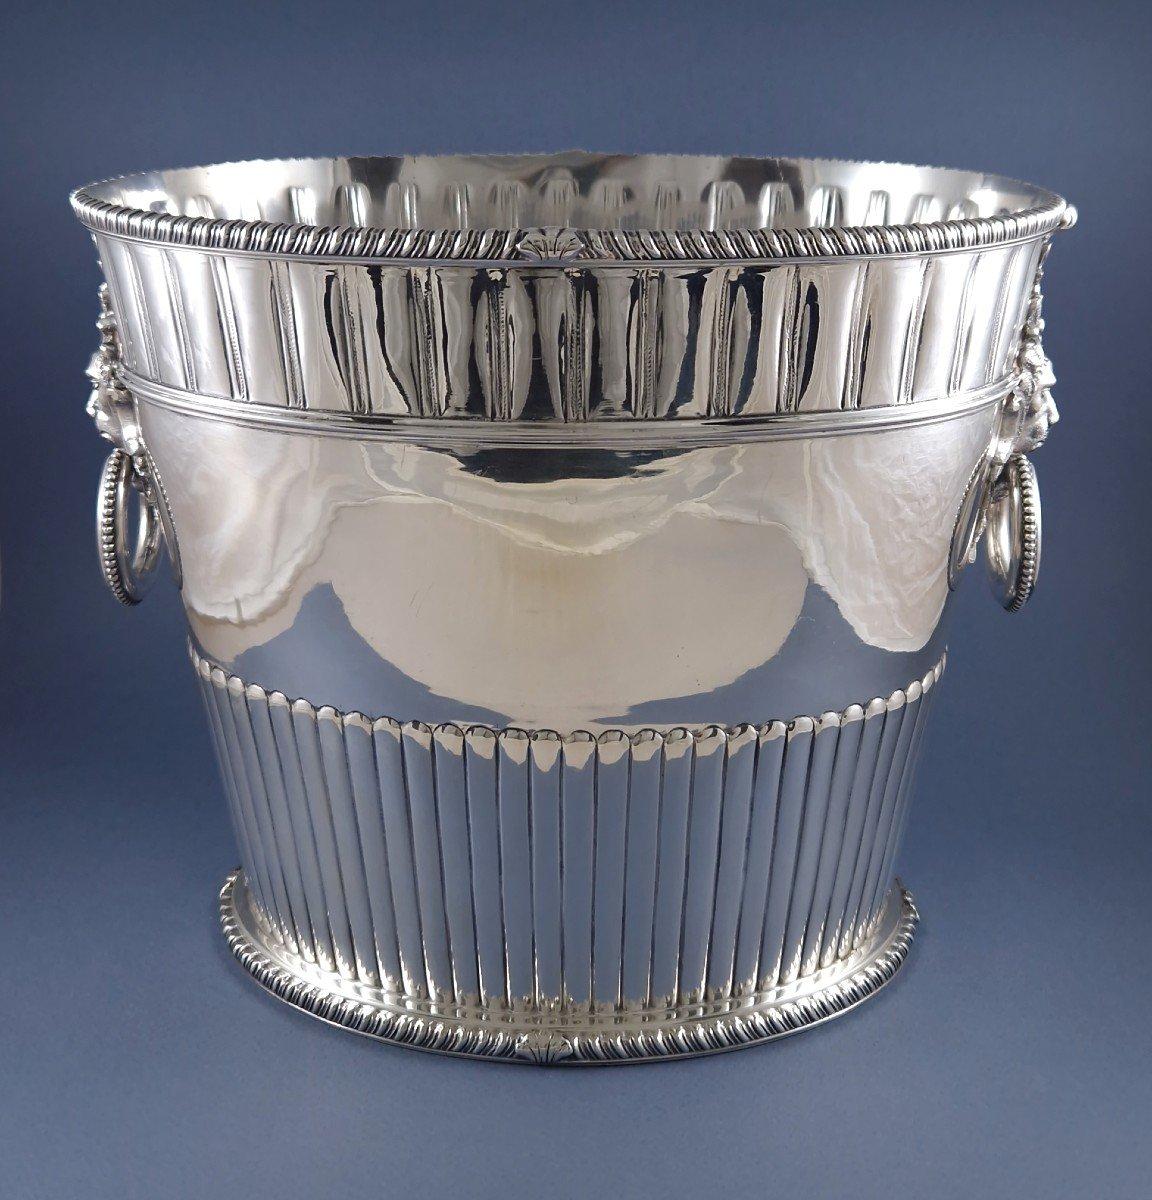 Large sterling silver champagne bucket from the mid-20th century 
Oval shape, decorated with gadroons, the grips in the shape of lion heads 
Silver hallmark 800 
Height: 23 cm 
Length: 28 cm 
Width: 20 cm 
Weight: 1951 grams